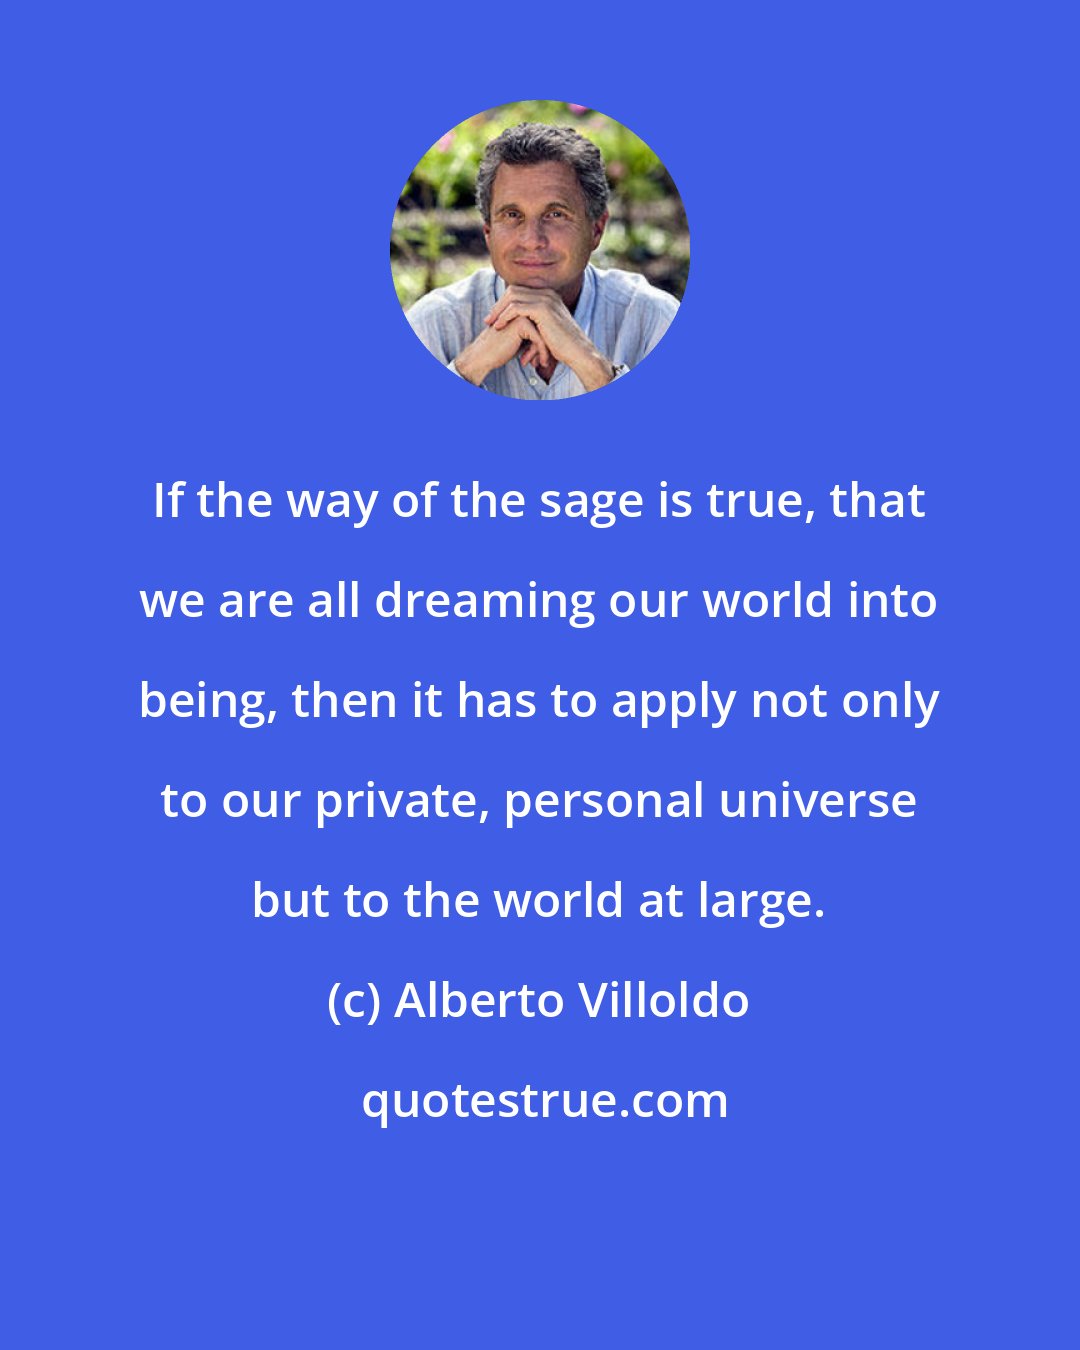 Alberto Villoldo: If the way of the sage is true, that we are all dreaming our world into being, then it has to apply not only to our private, personal universe but to the world at large.